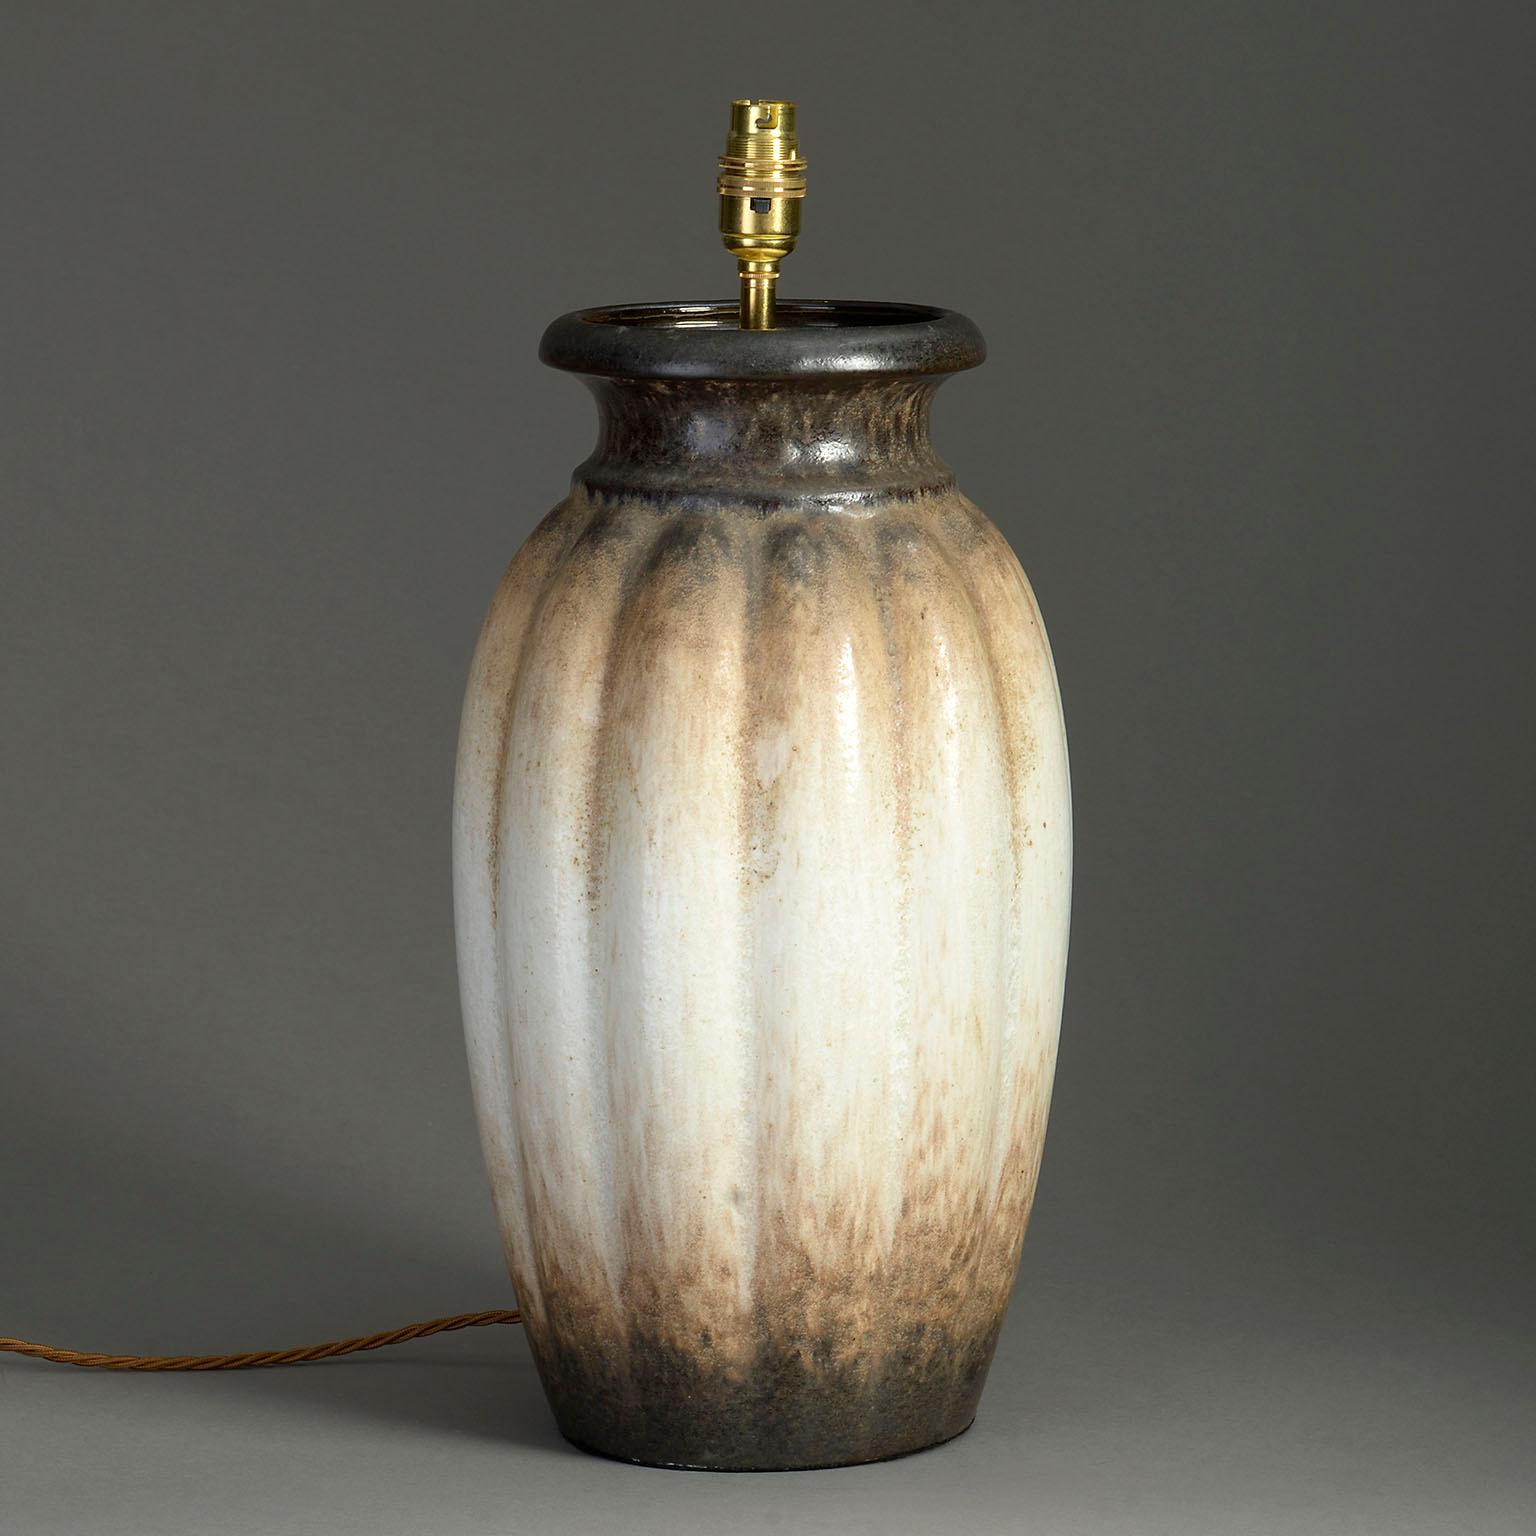 A large pottery art vase, the body of generously ribbed form, with a mottled cappuccino glaze throughout.

Now mounted as a lamp

Dimensions refer to vase.

Shade not included.